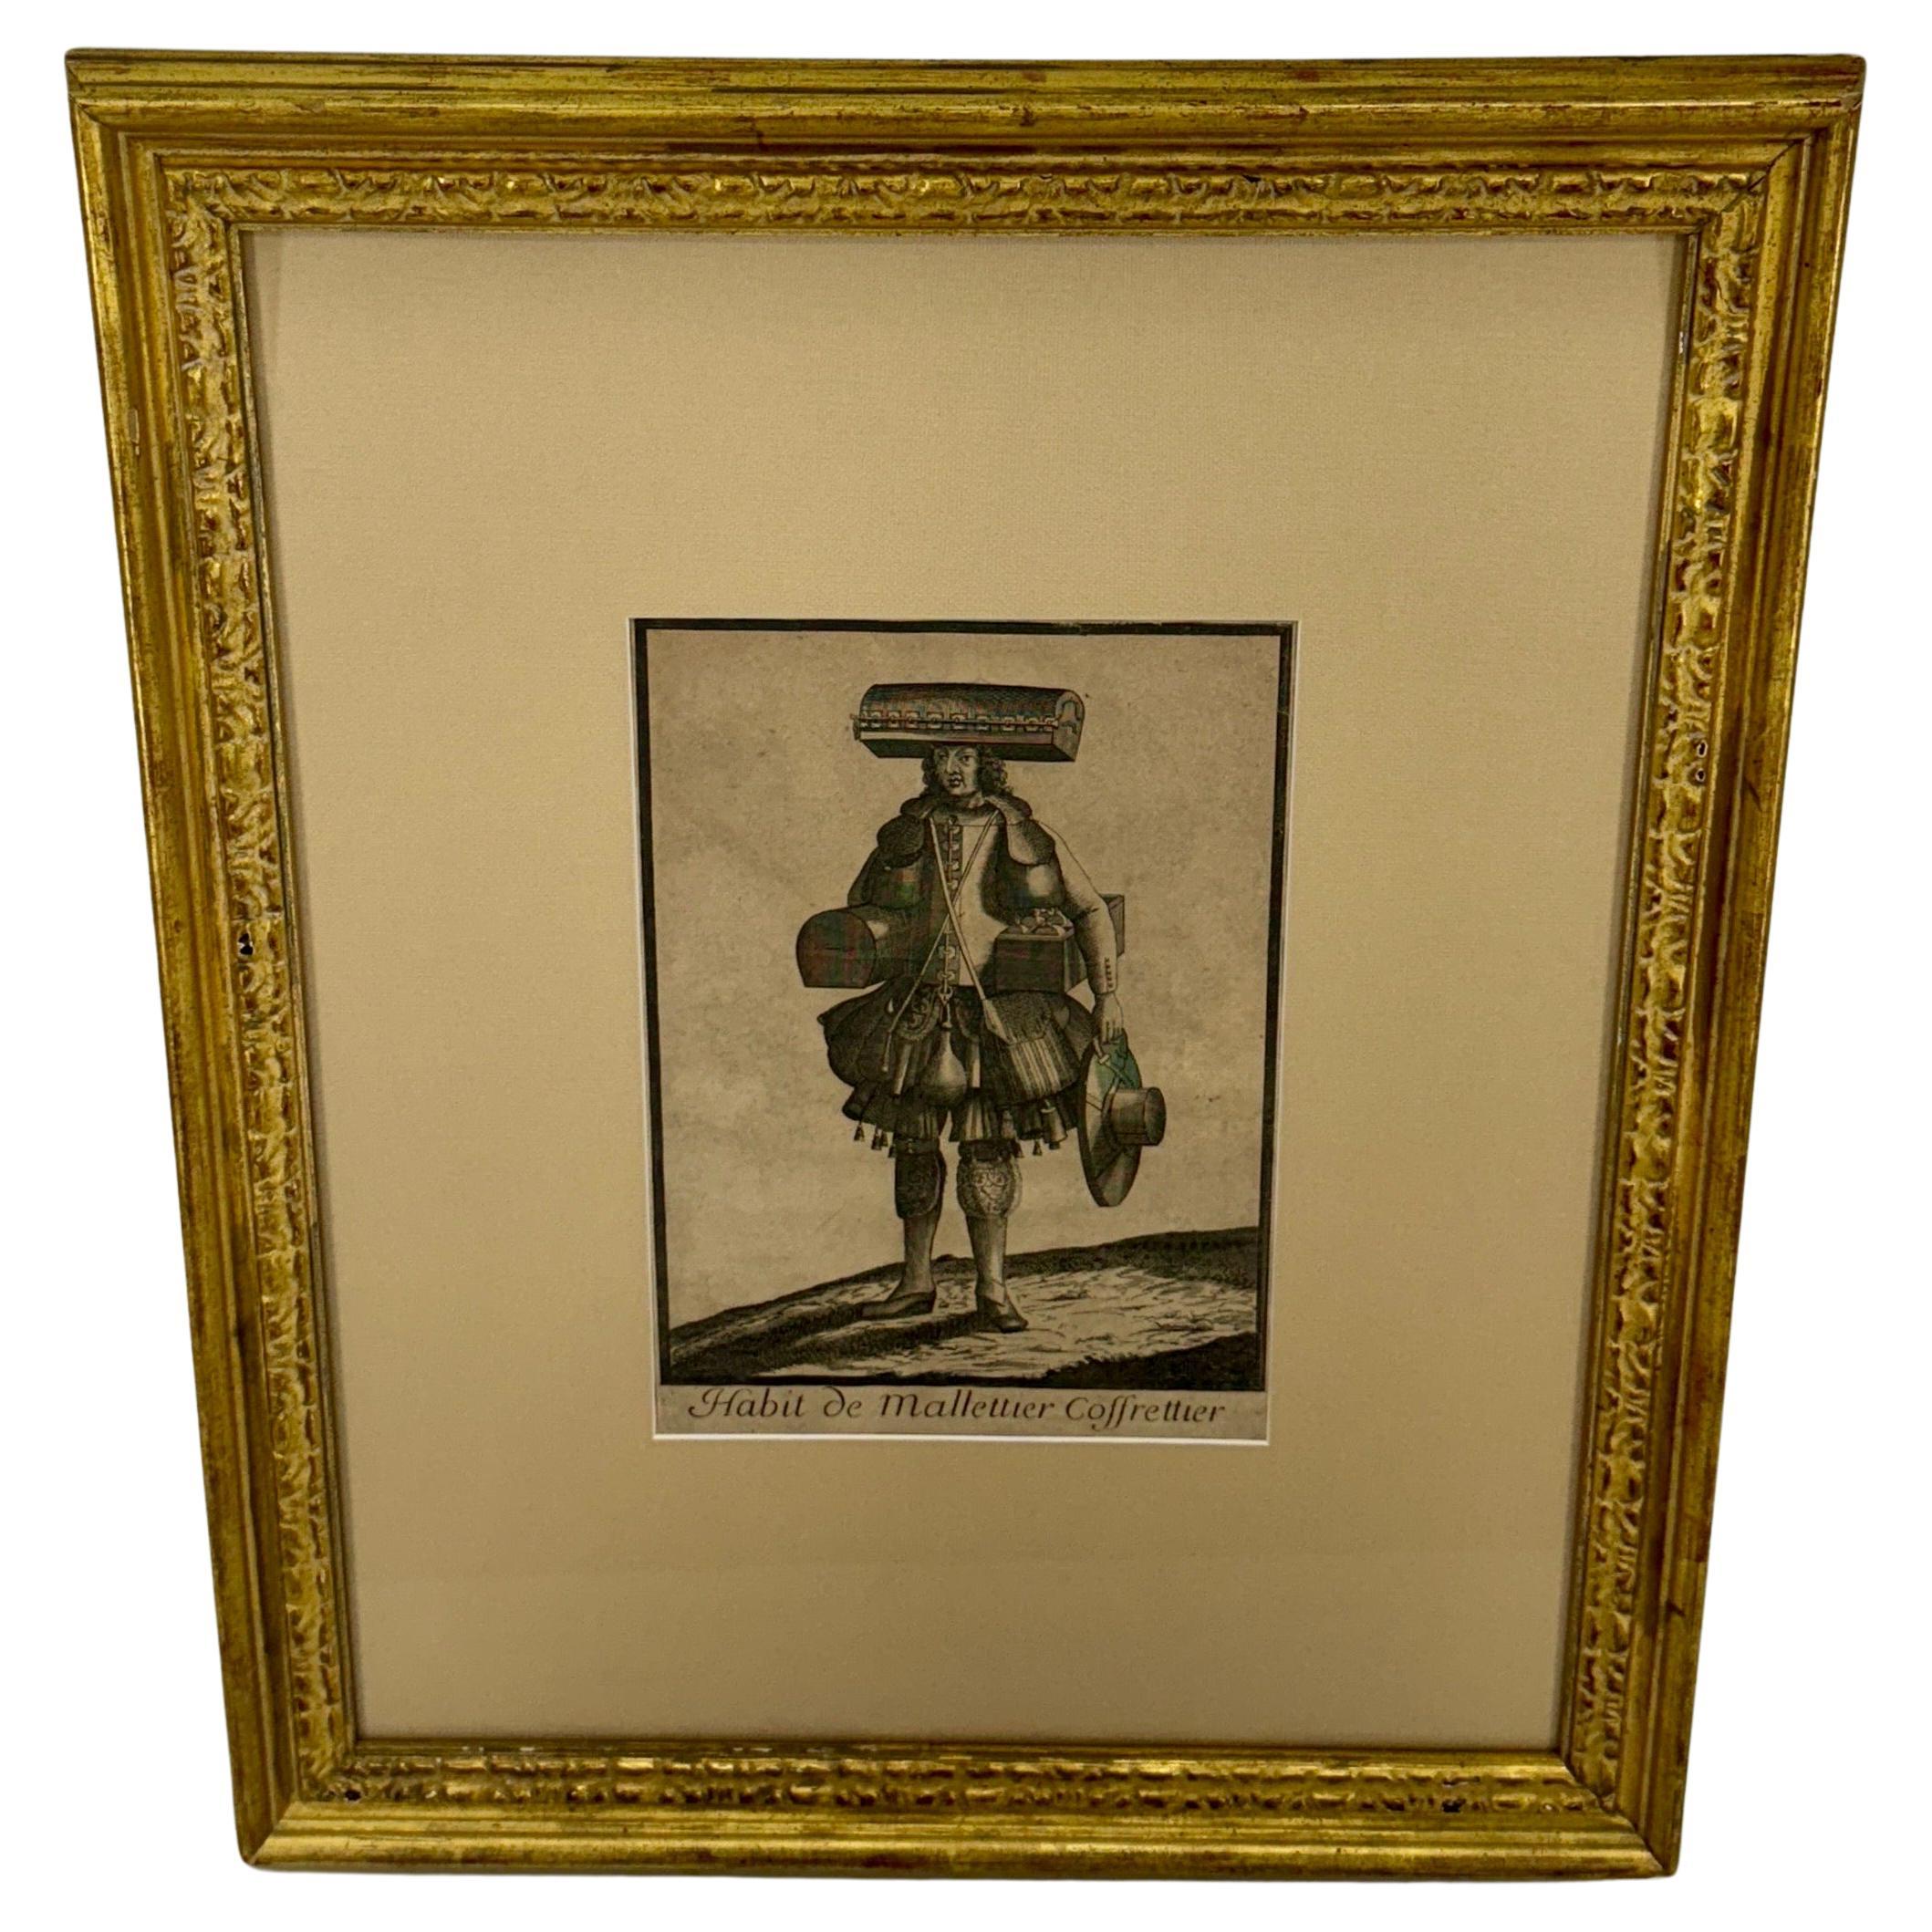 This classic vintage print titled Habit de Mallettier Coffrettier (Outfit of a Trunk Maker) has been matted and framed in an antique gold frame. The French artist is Unknown. This artwork would make a wonderful piece to add to gallery wall